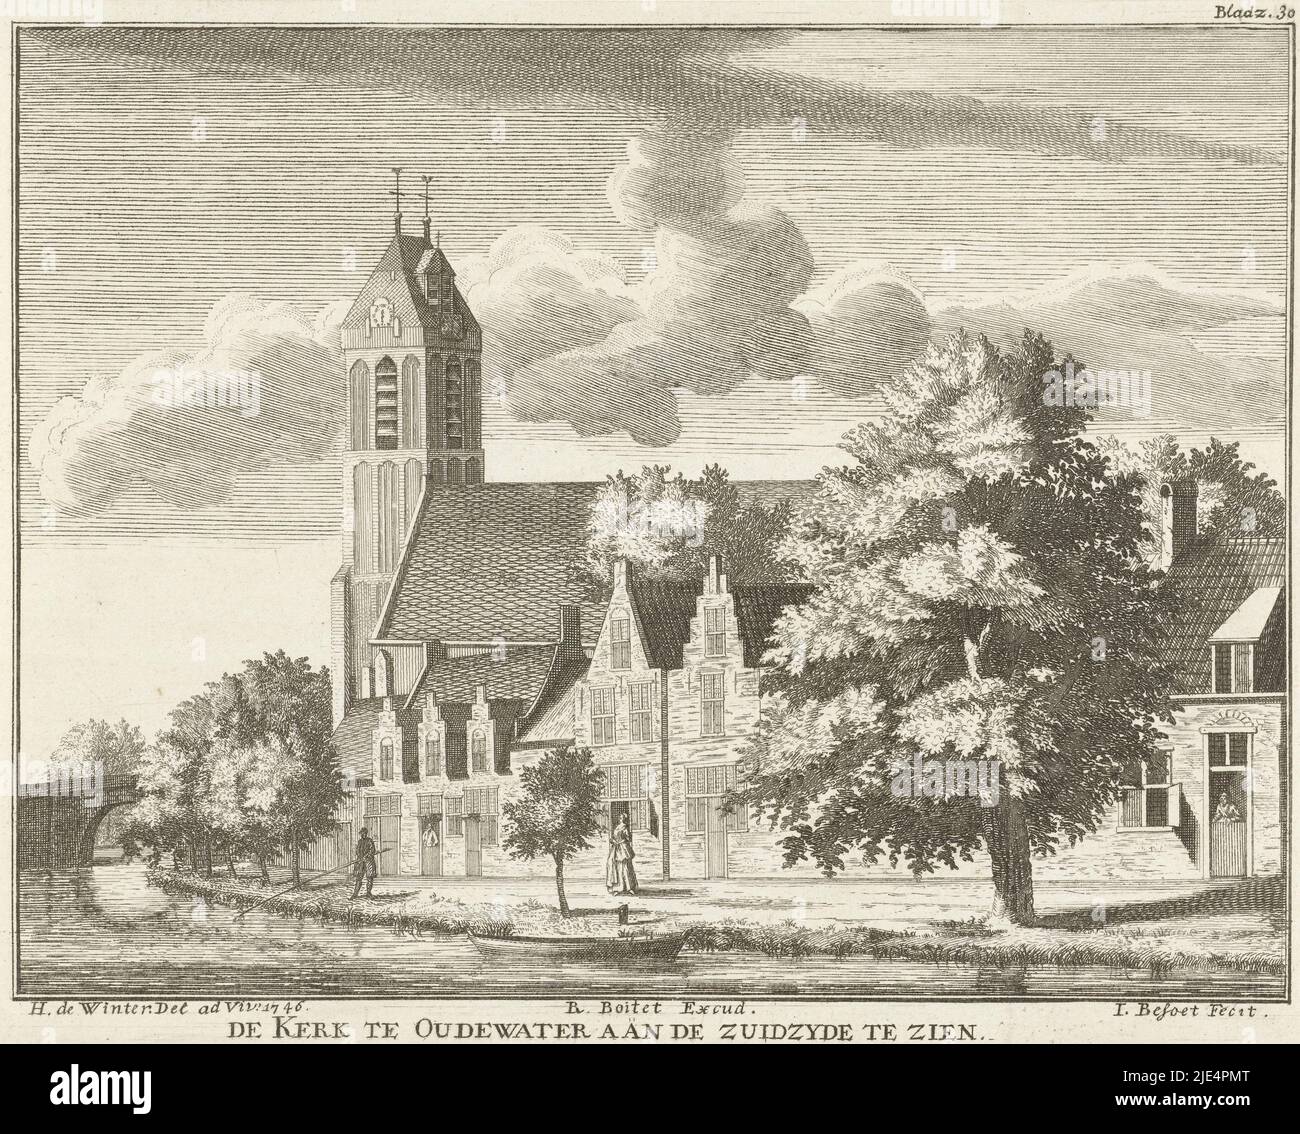 View of Grote or Sint Michaëlskerk in Oudewater The church in Oudewater on the zuidzyde to be seen, print maker: Iven Besoet, (mentioned on object), intermediary draughtsman: Hendrik de Winter, (mentioned on object), publisher: Reinier Boitet, (mentioned on object), print maker: Netherlands, publisher: Delft, 1746 - 1747 and/or 1747, paper, etching, engraving, h 157 mm × w 200 mm Stock Photo